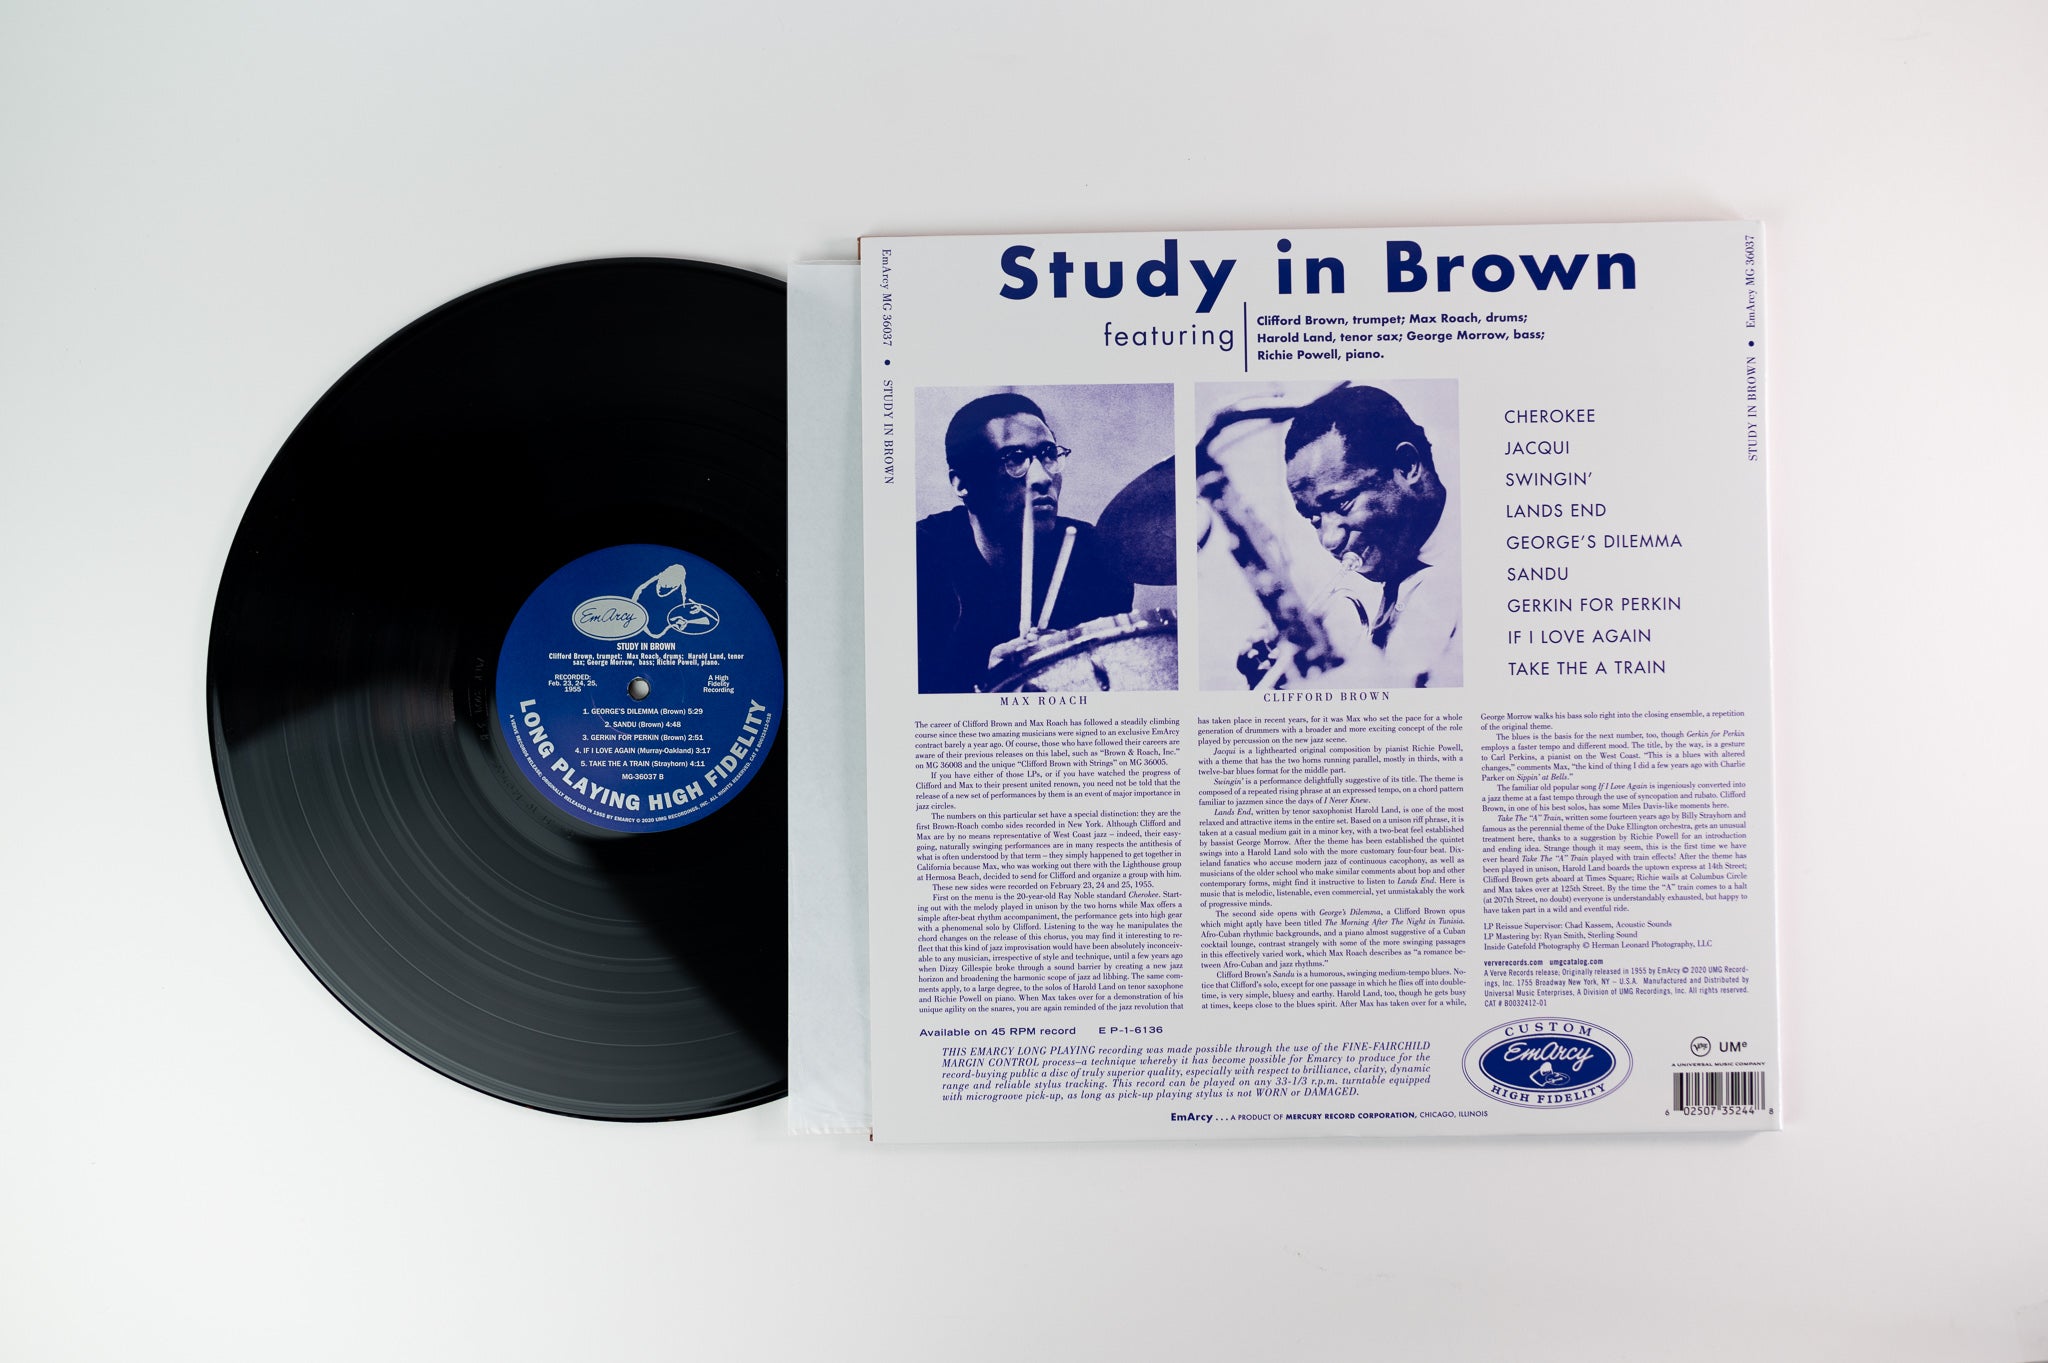 Clifford Brown And Max Roach - Study In Brown on Verve - Acoustic Sounds Series